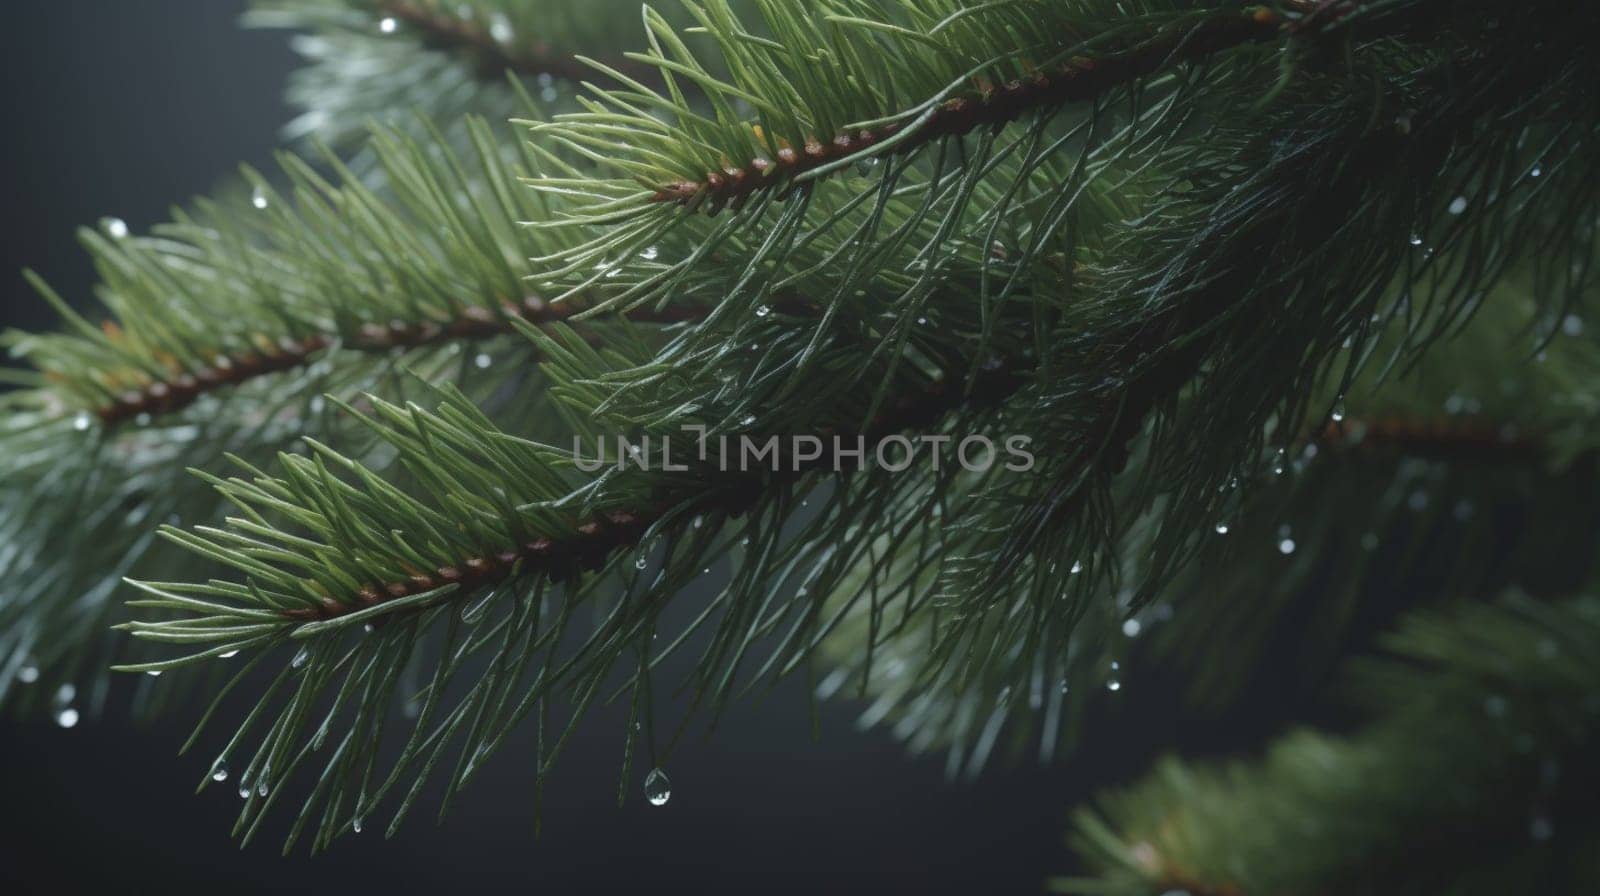 A close up of the evergreen branches of a coniferous Christmas tree, showcasing the larch twigs and terrestrial plant in a festive landscape